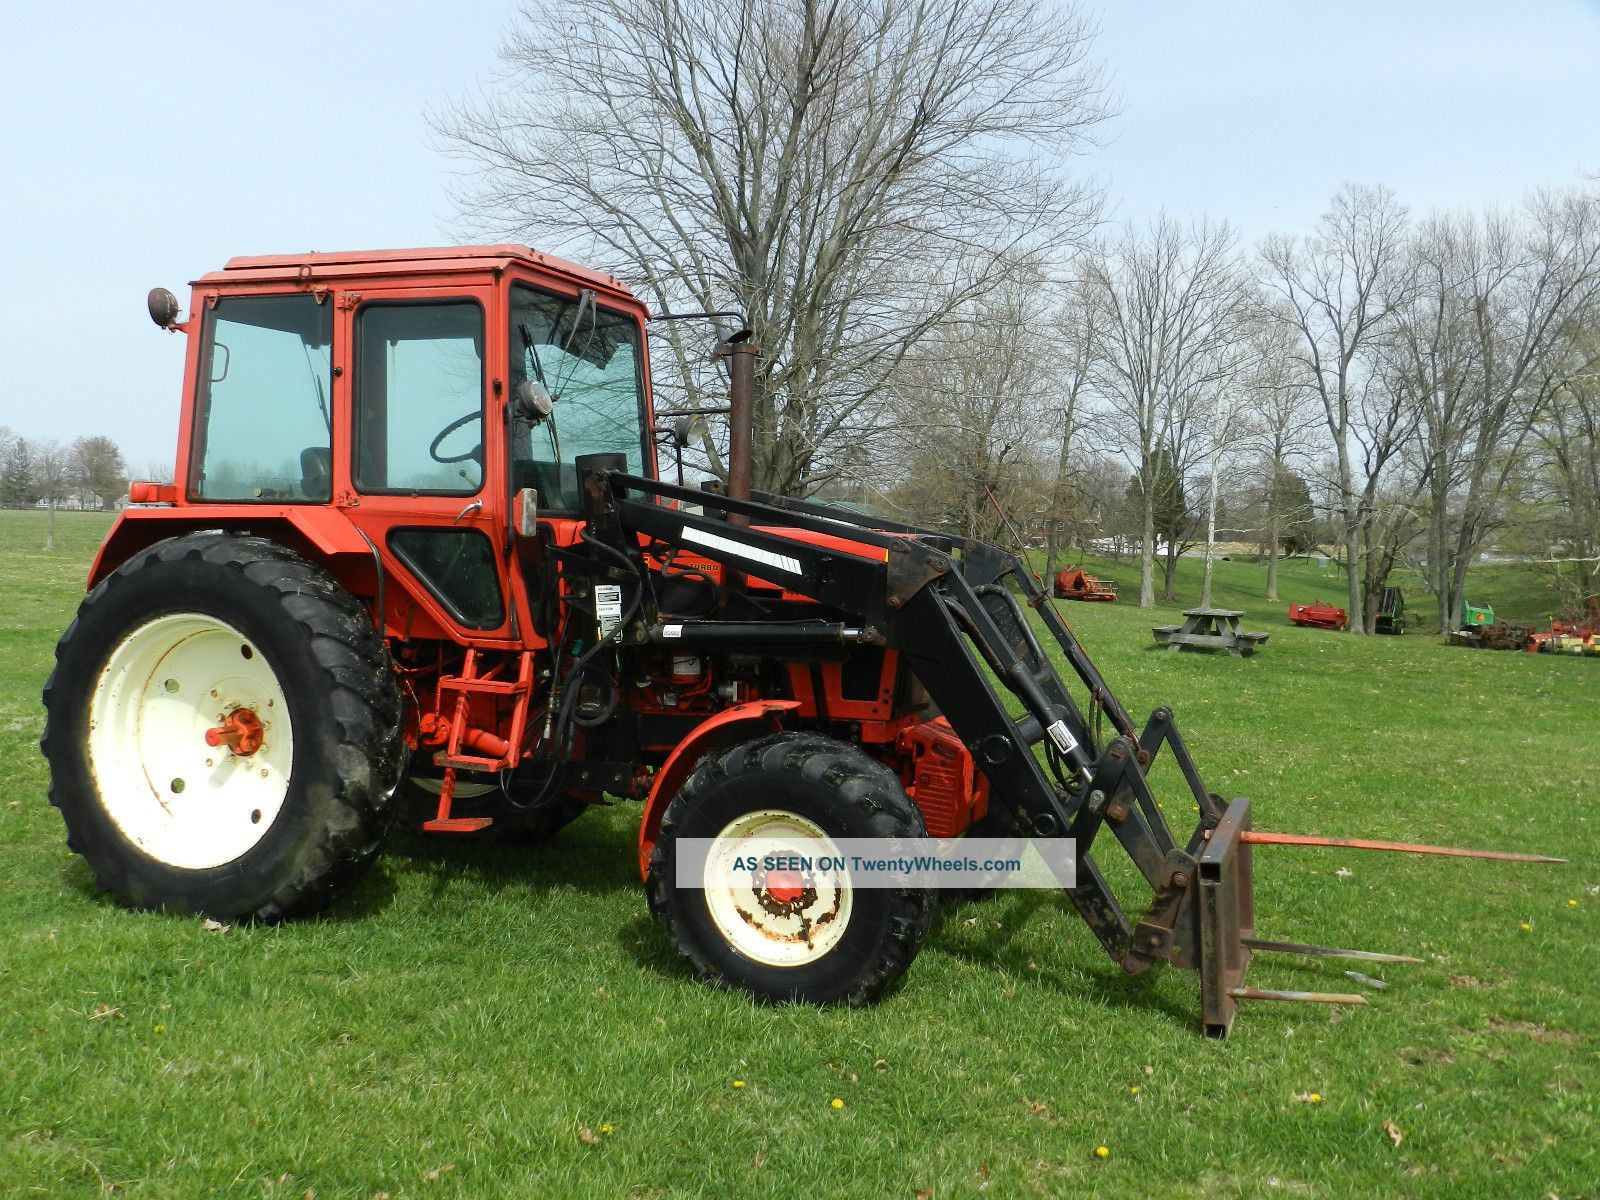 Belarus 925 Tractor With Cab & Front Loader - 4x4 - 1537 Hours ...